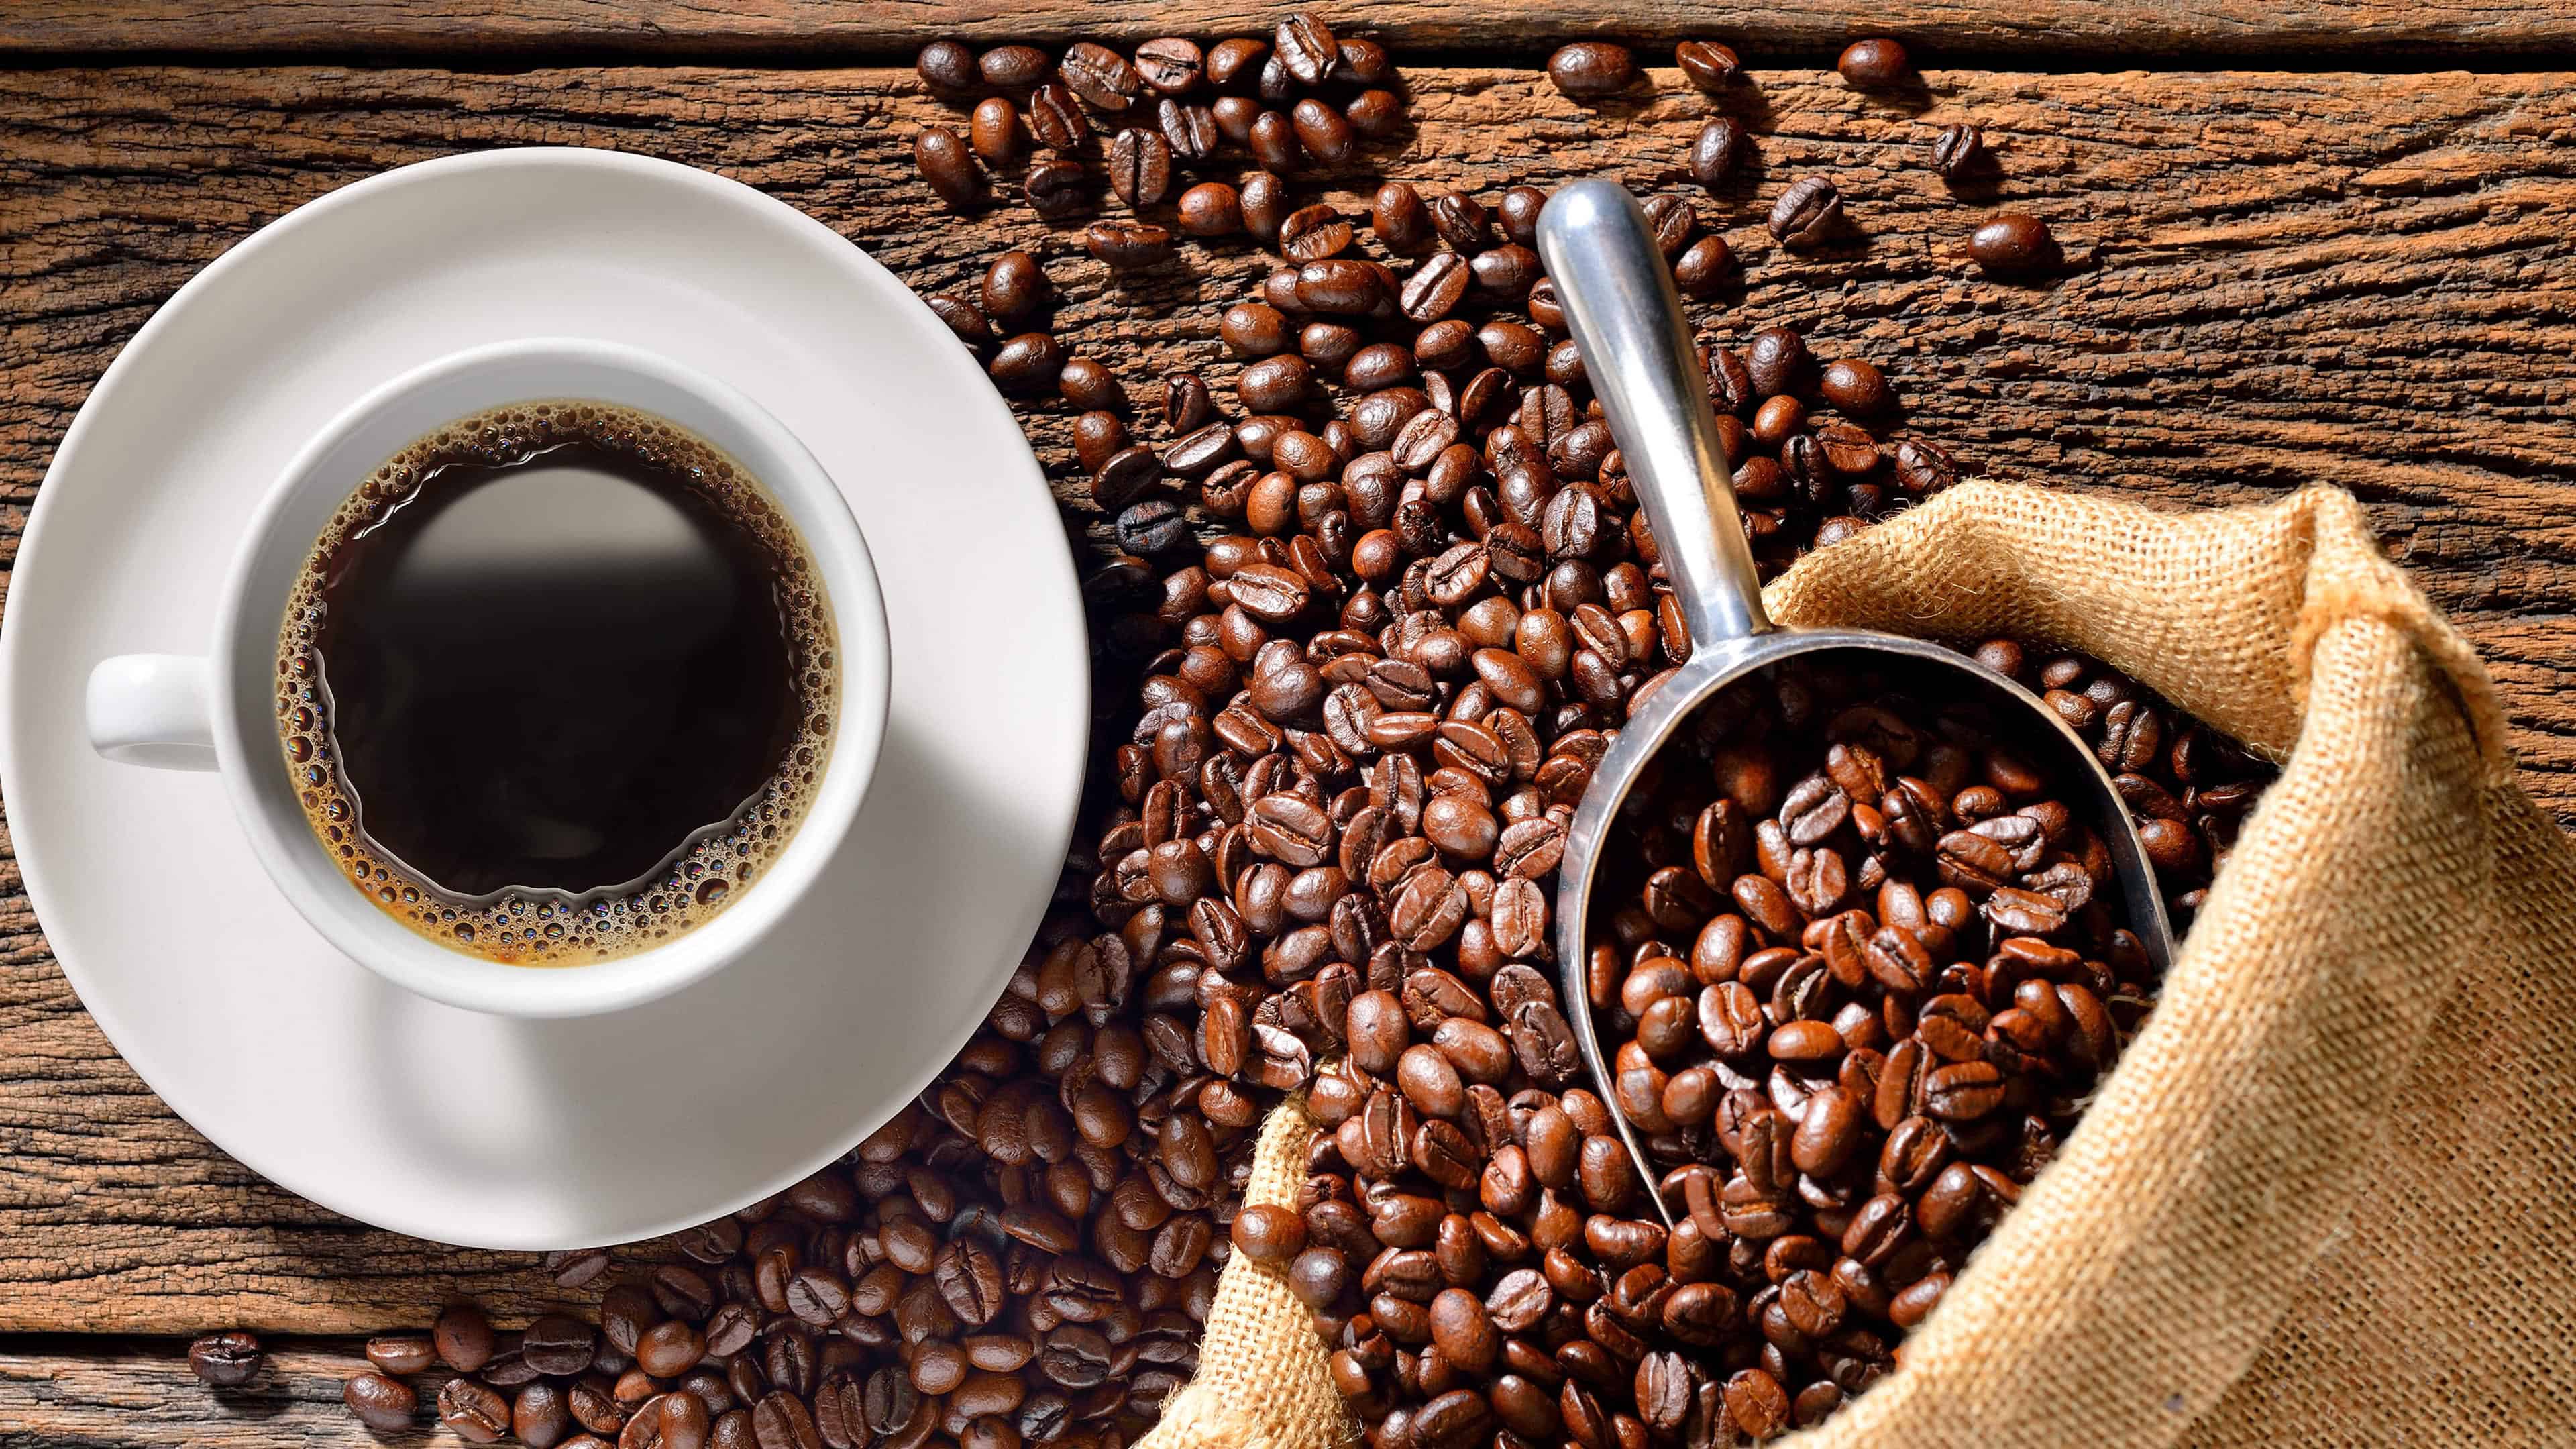 A photo consisting of caffeine sources: coffee beans and a cup of espresso